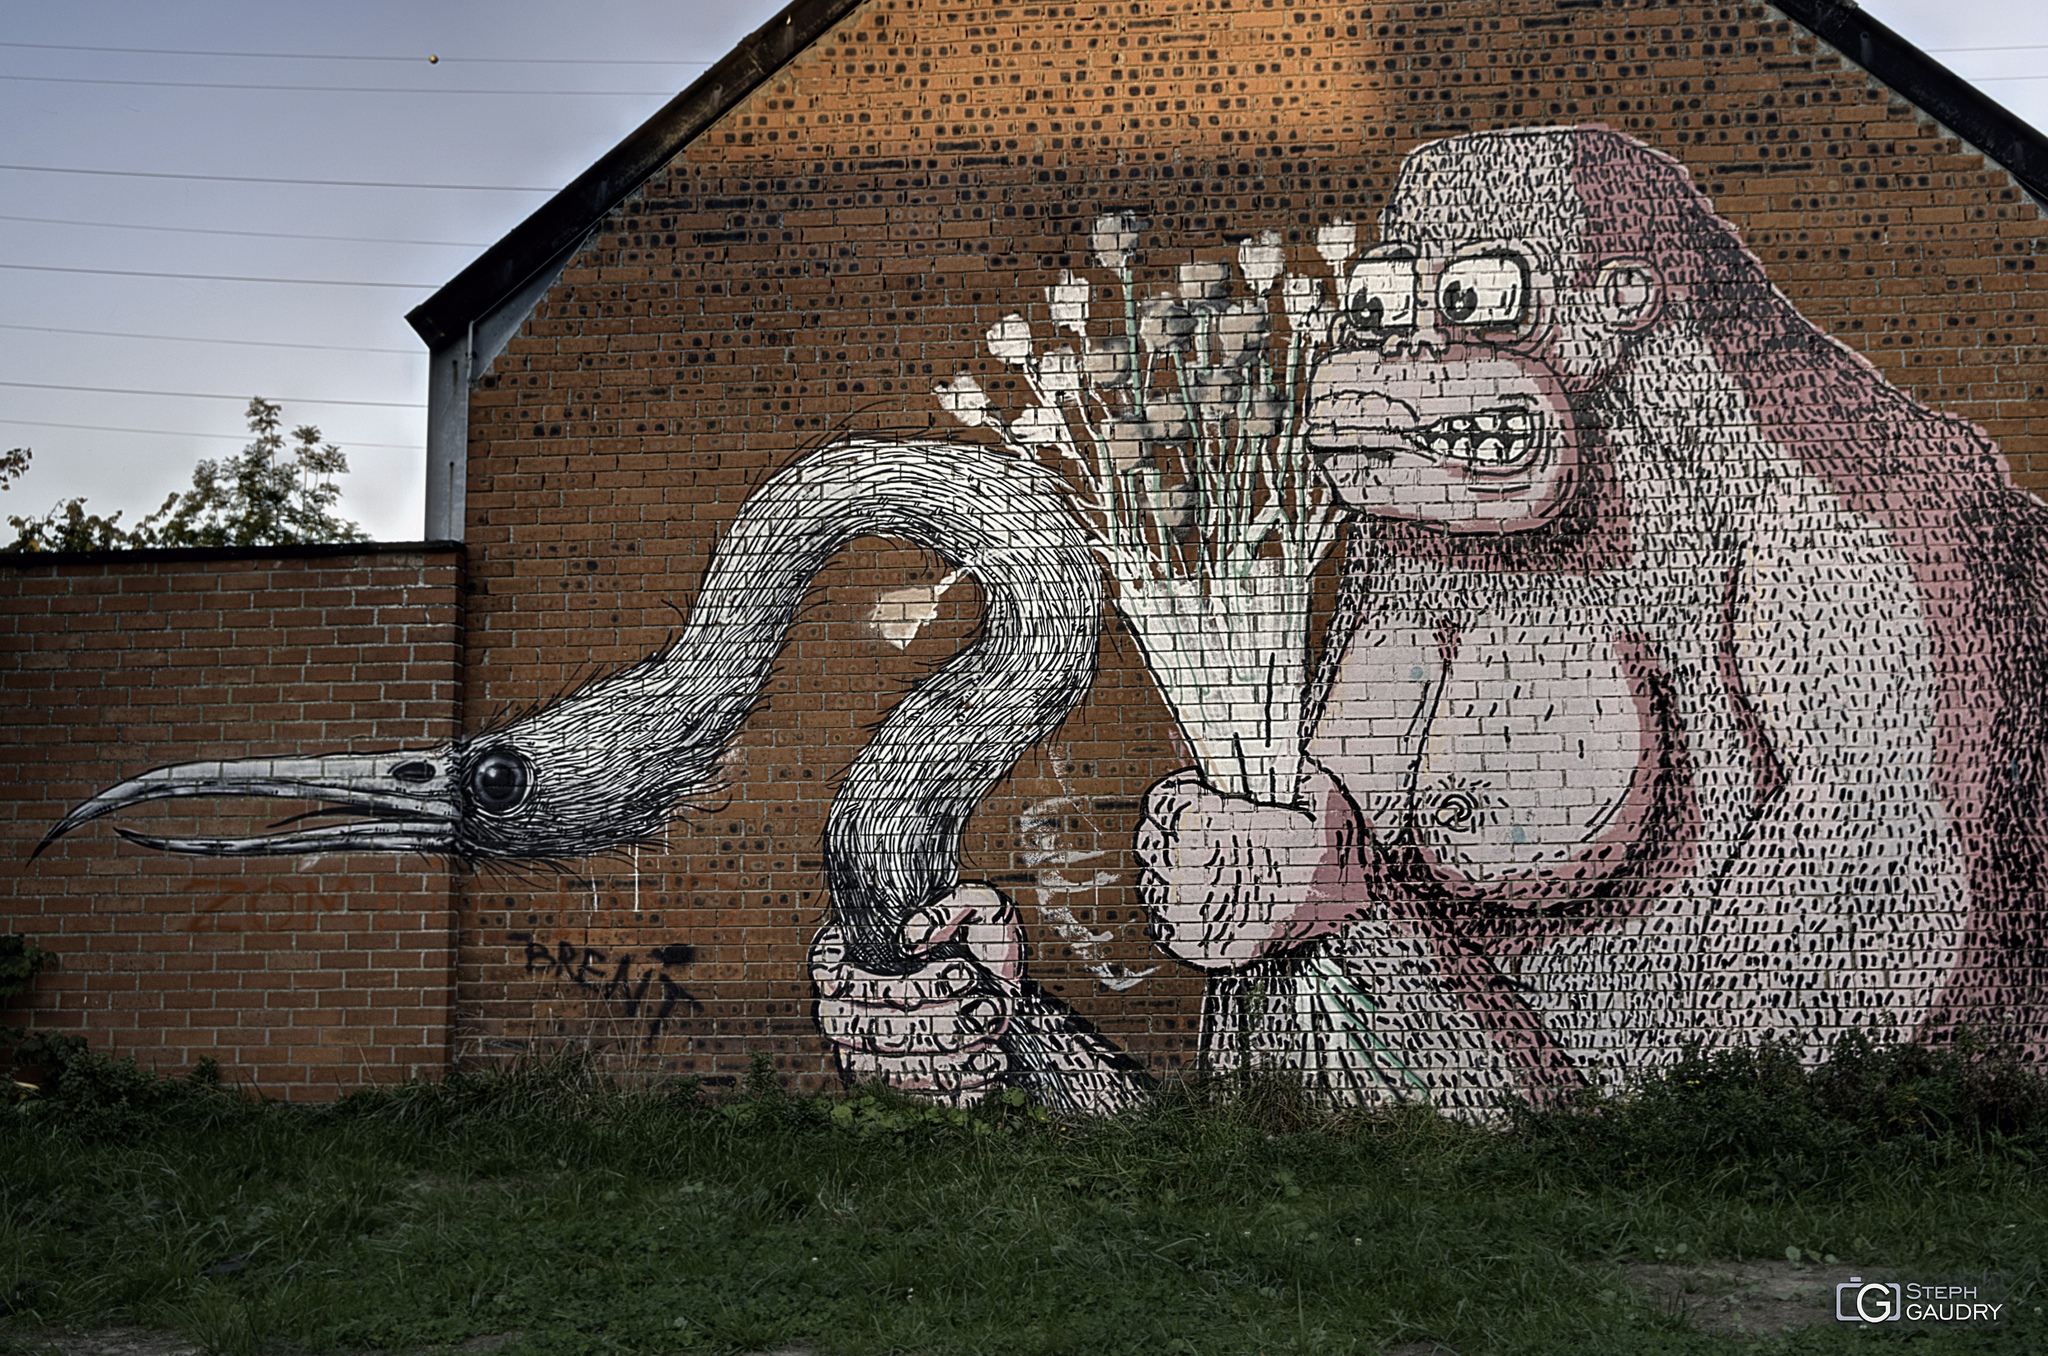 Doel, Proposal of marriage - gorilla version by Roa [Click to start slideshow]